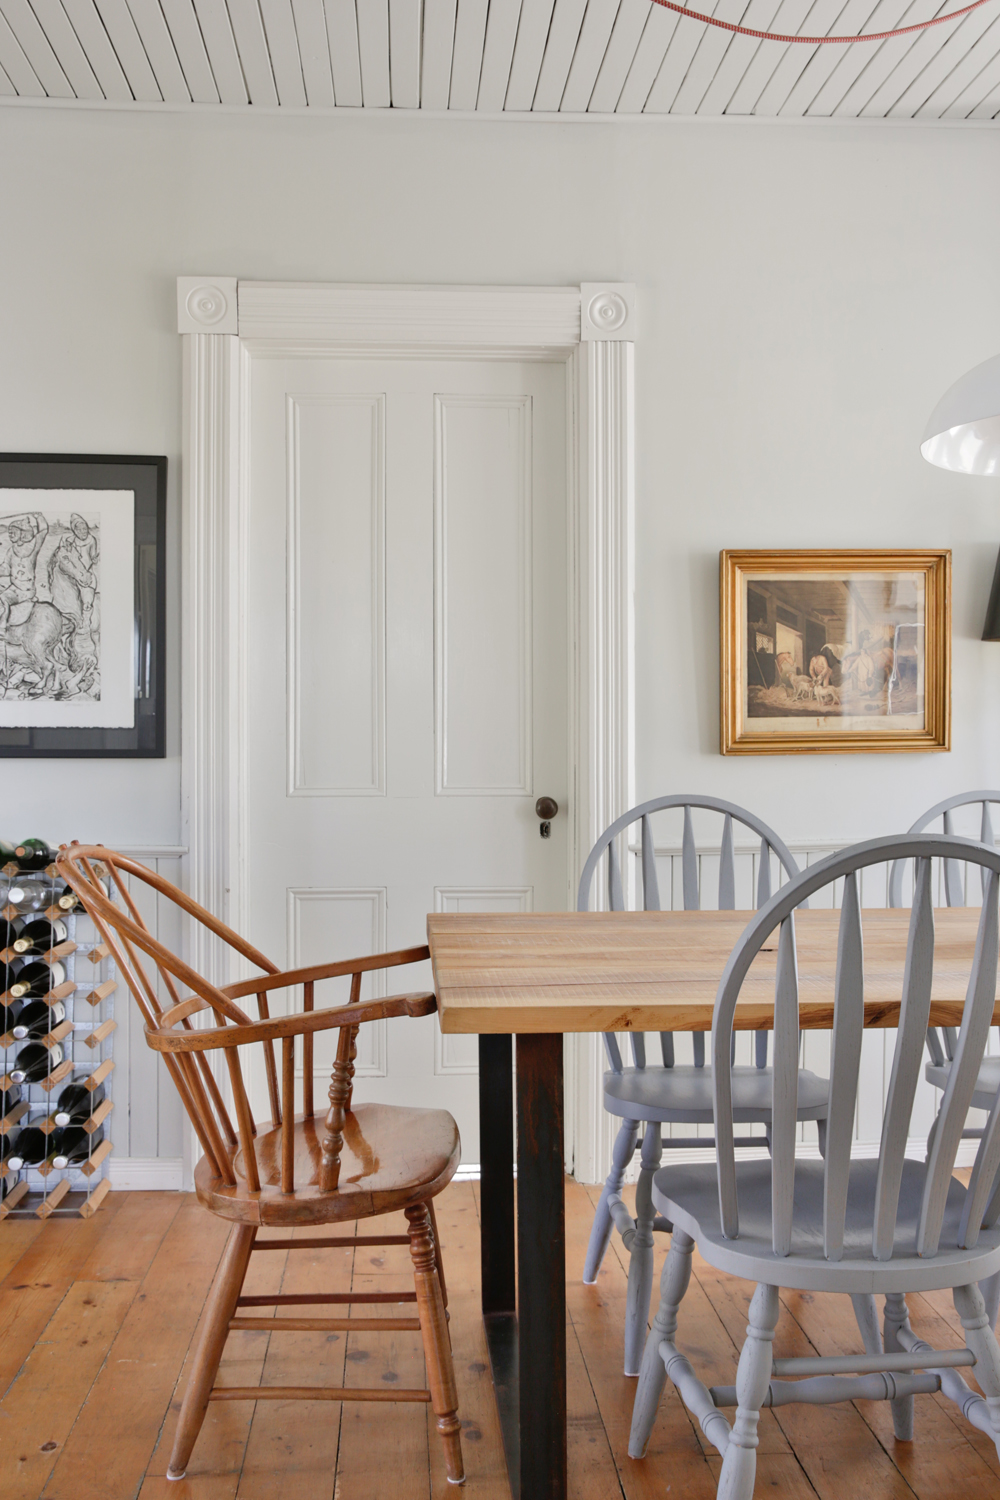 Dining chairs and table in farmhouse dining room